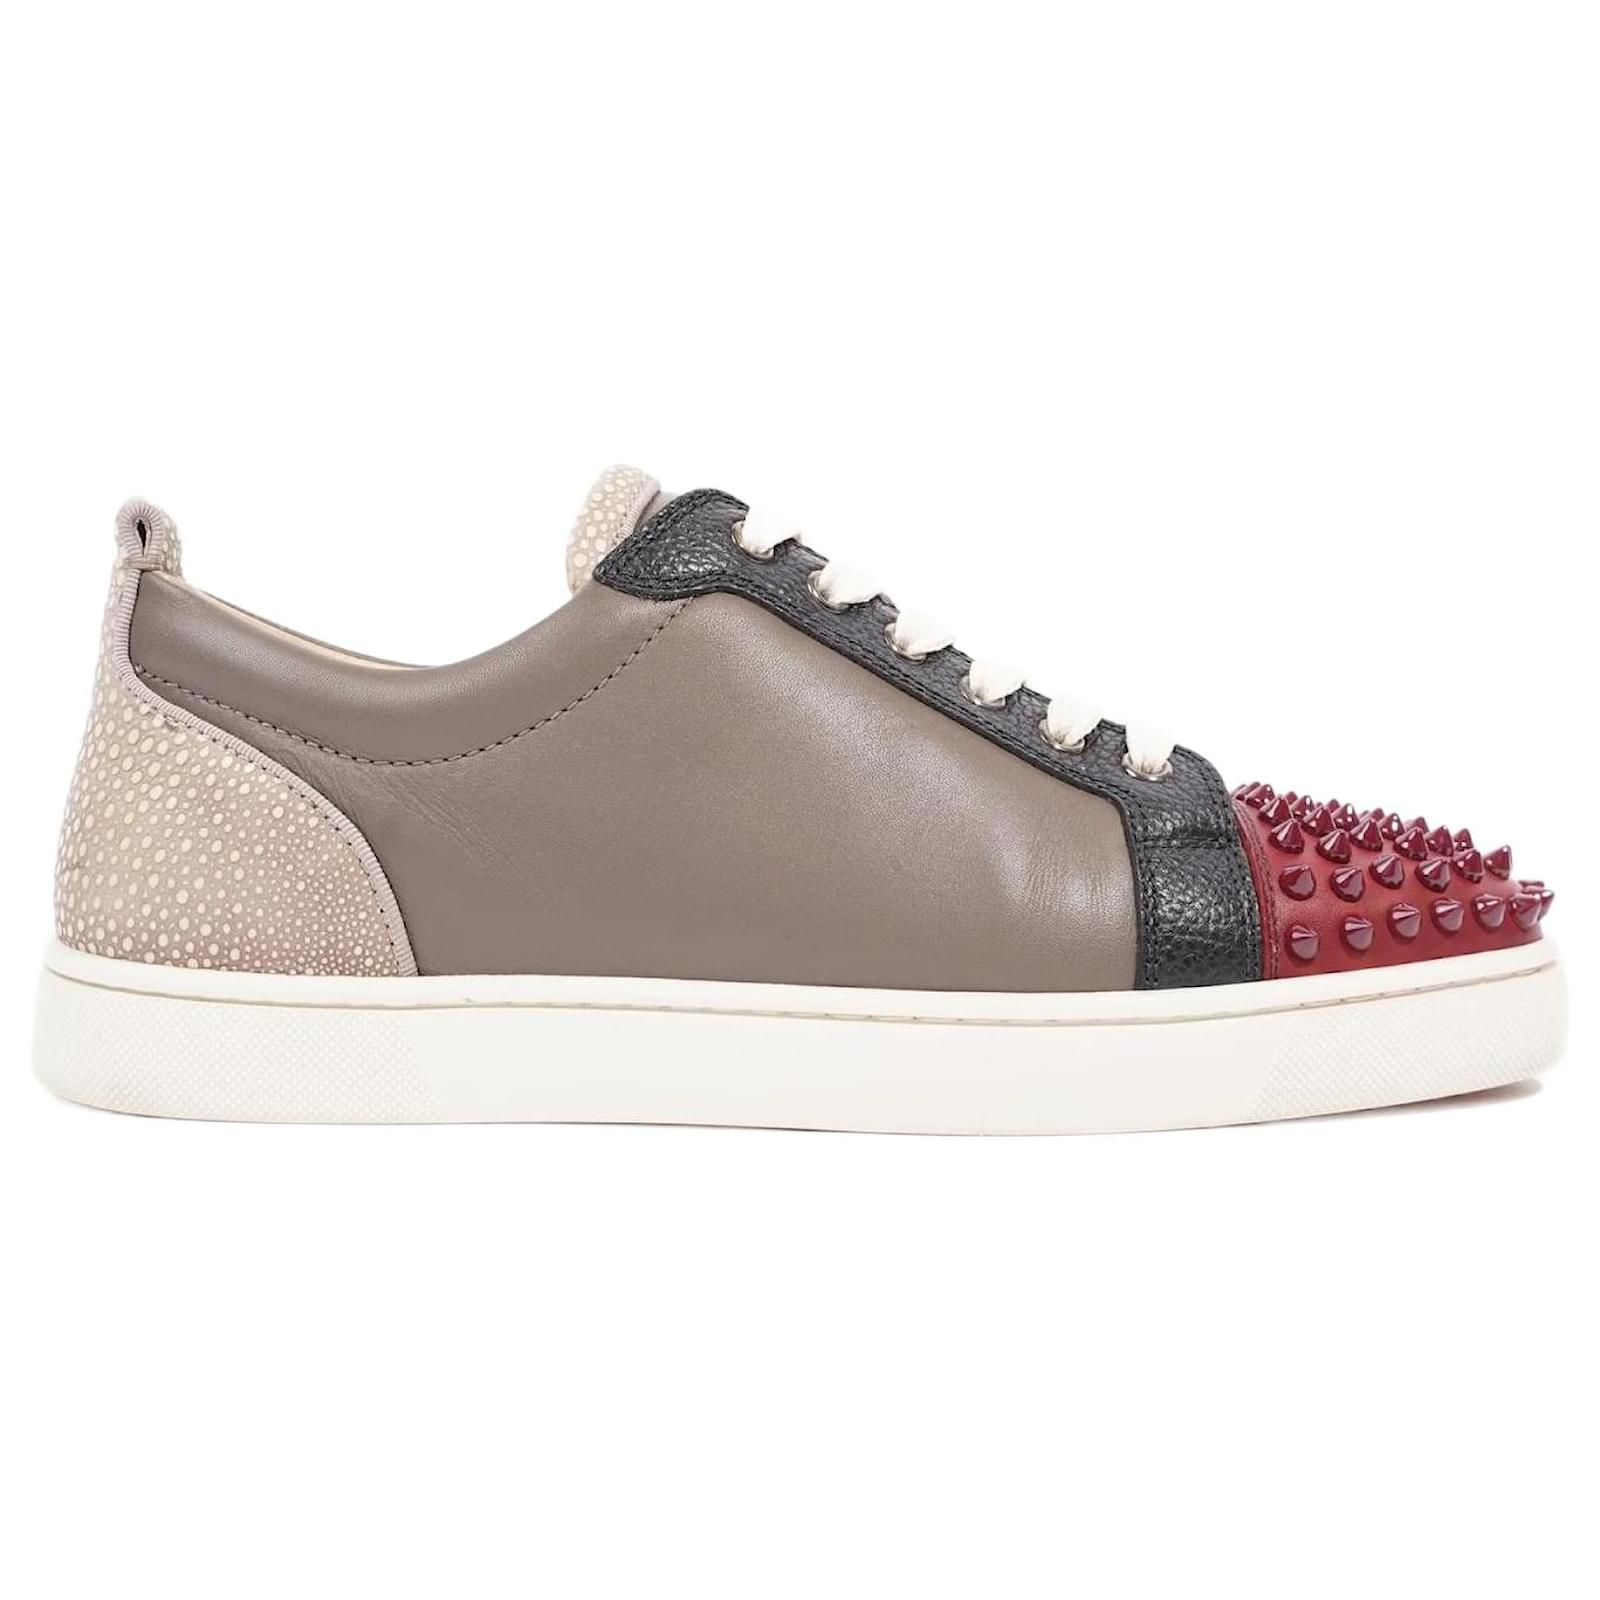 Christian Louboutin Men's Louis Orlato Red Perforated